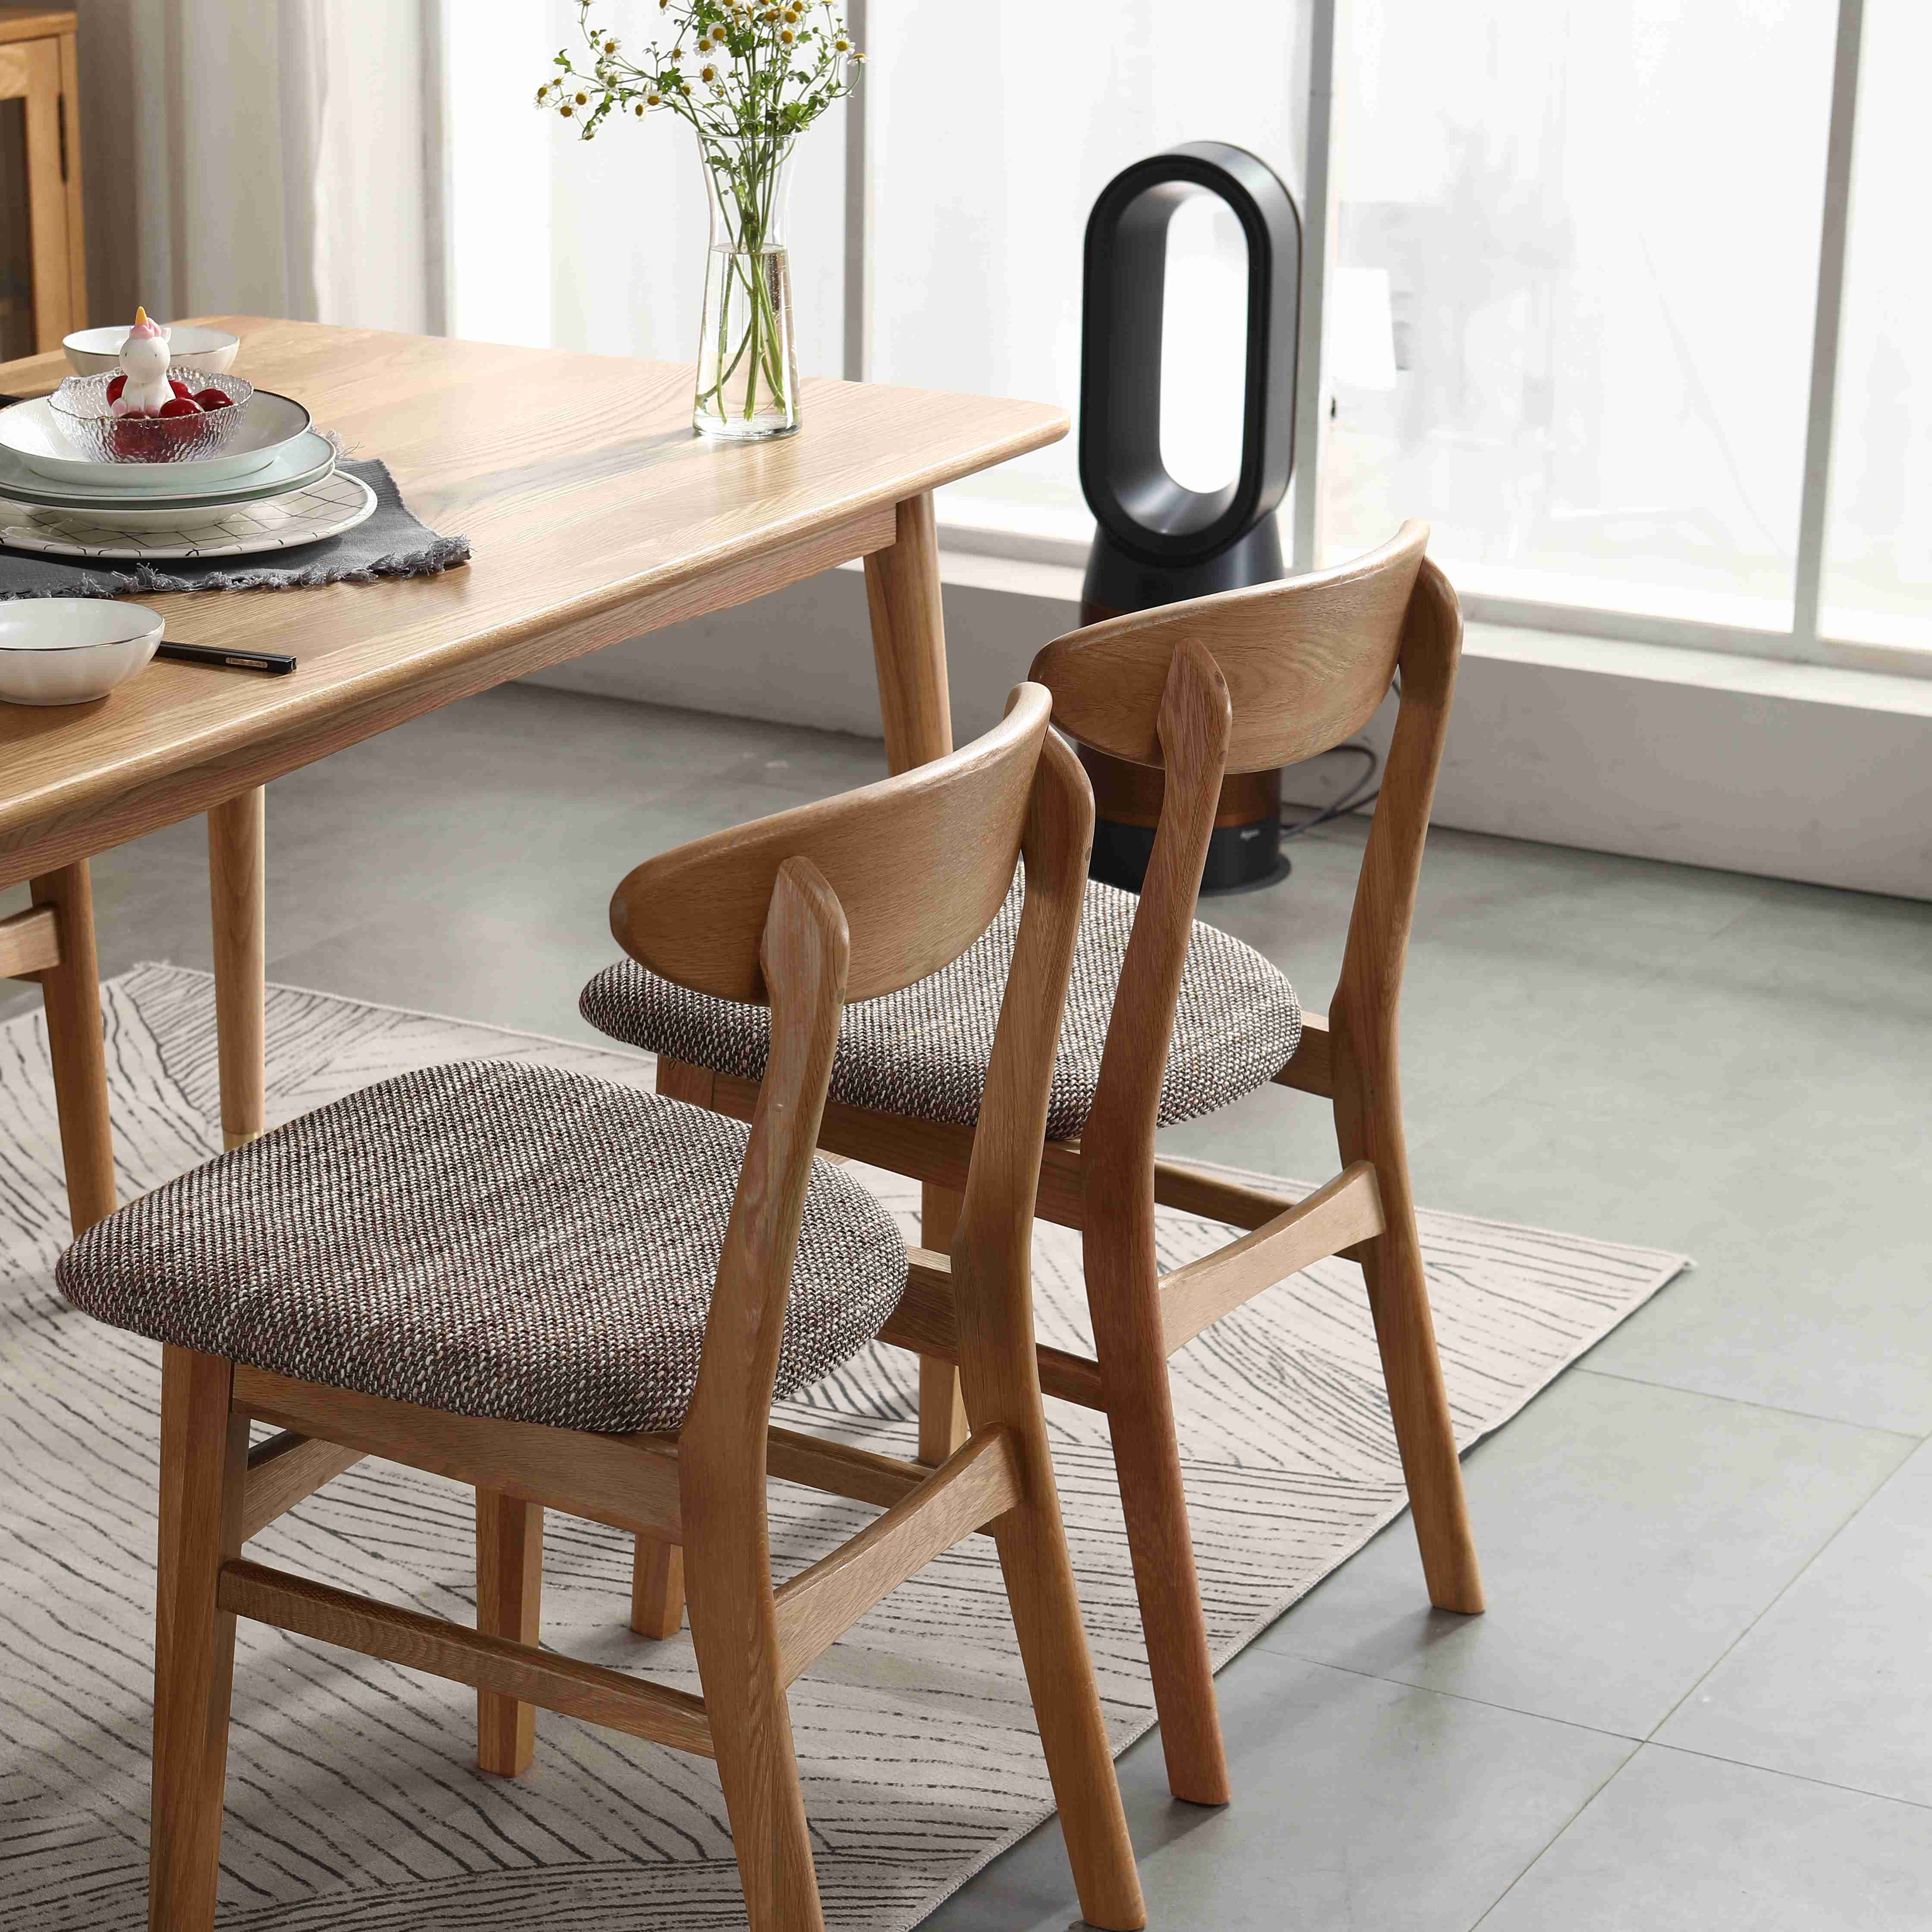 dining chair oak with fabric seat Chair wood chair wood dining chair MDF chair oak chair oak dining chair oak wood chair white oak chair beech chair beech wood chair birch chair birch wood chair dining chair wooden chair solid wood chair office chair indo